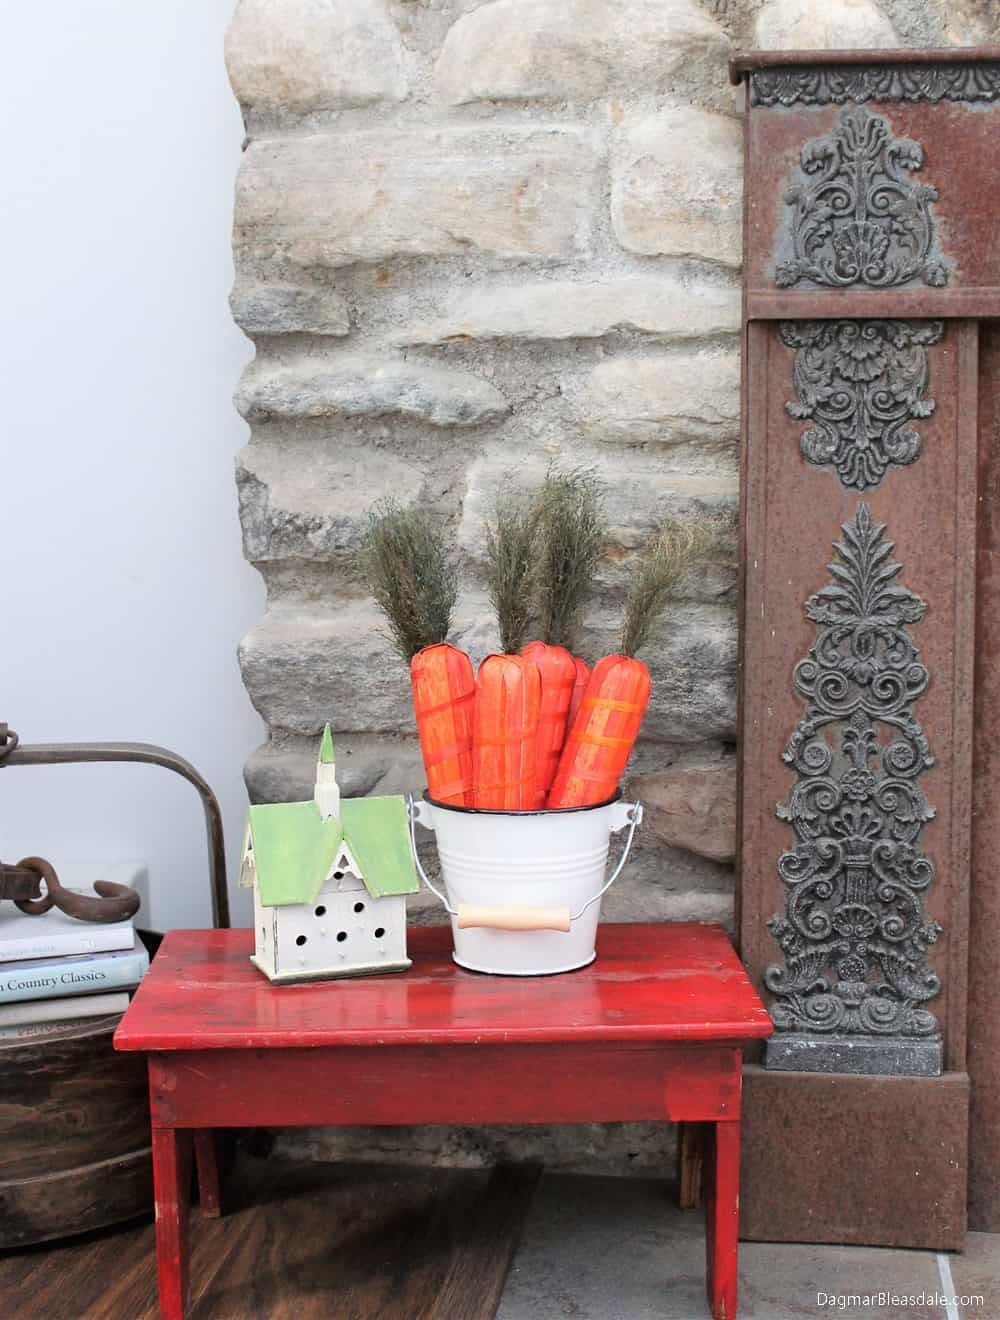 little red table with basket filled with fake carrots and fireplace